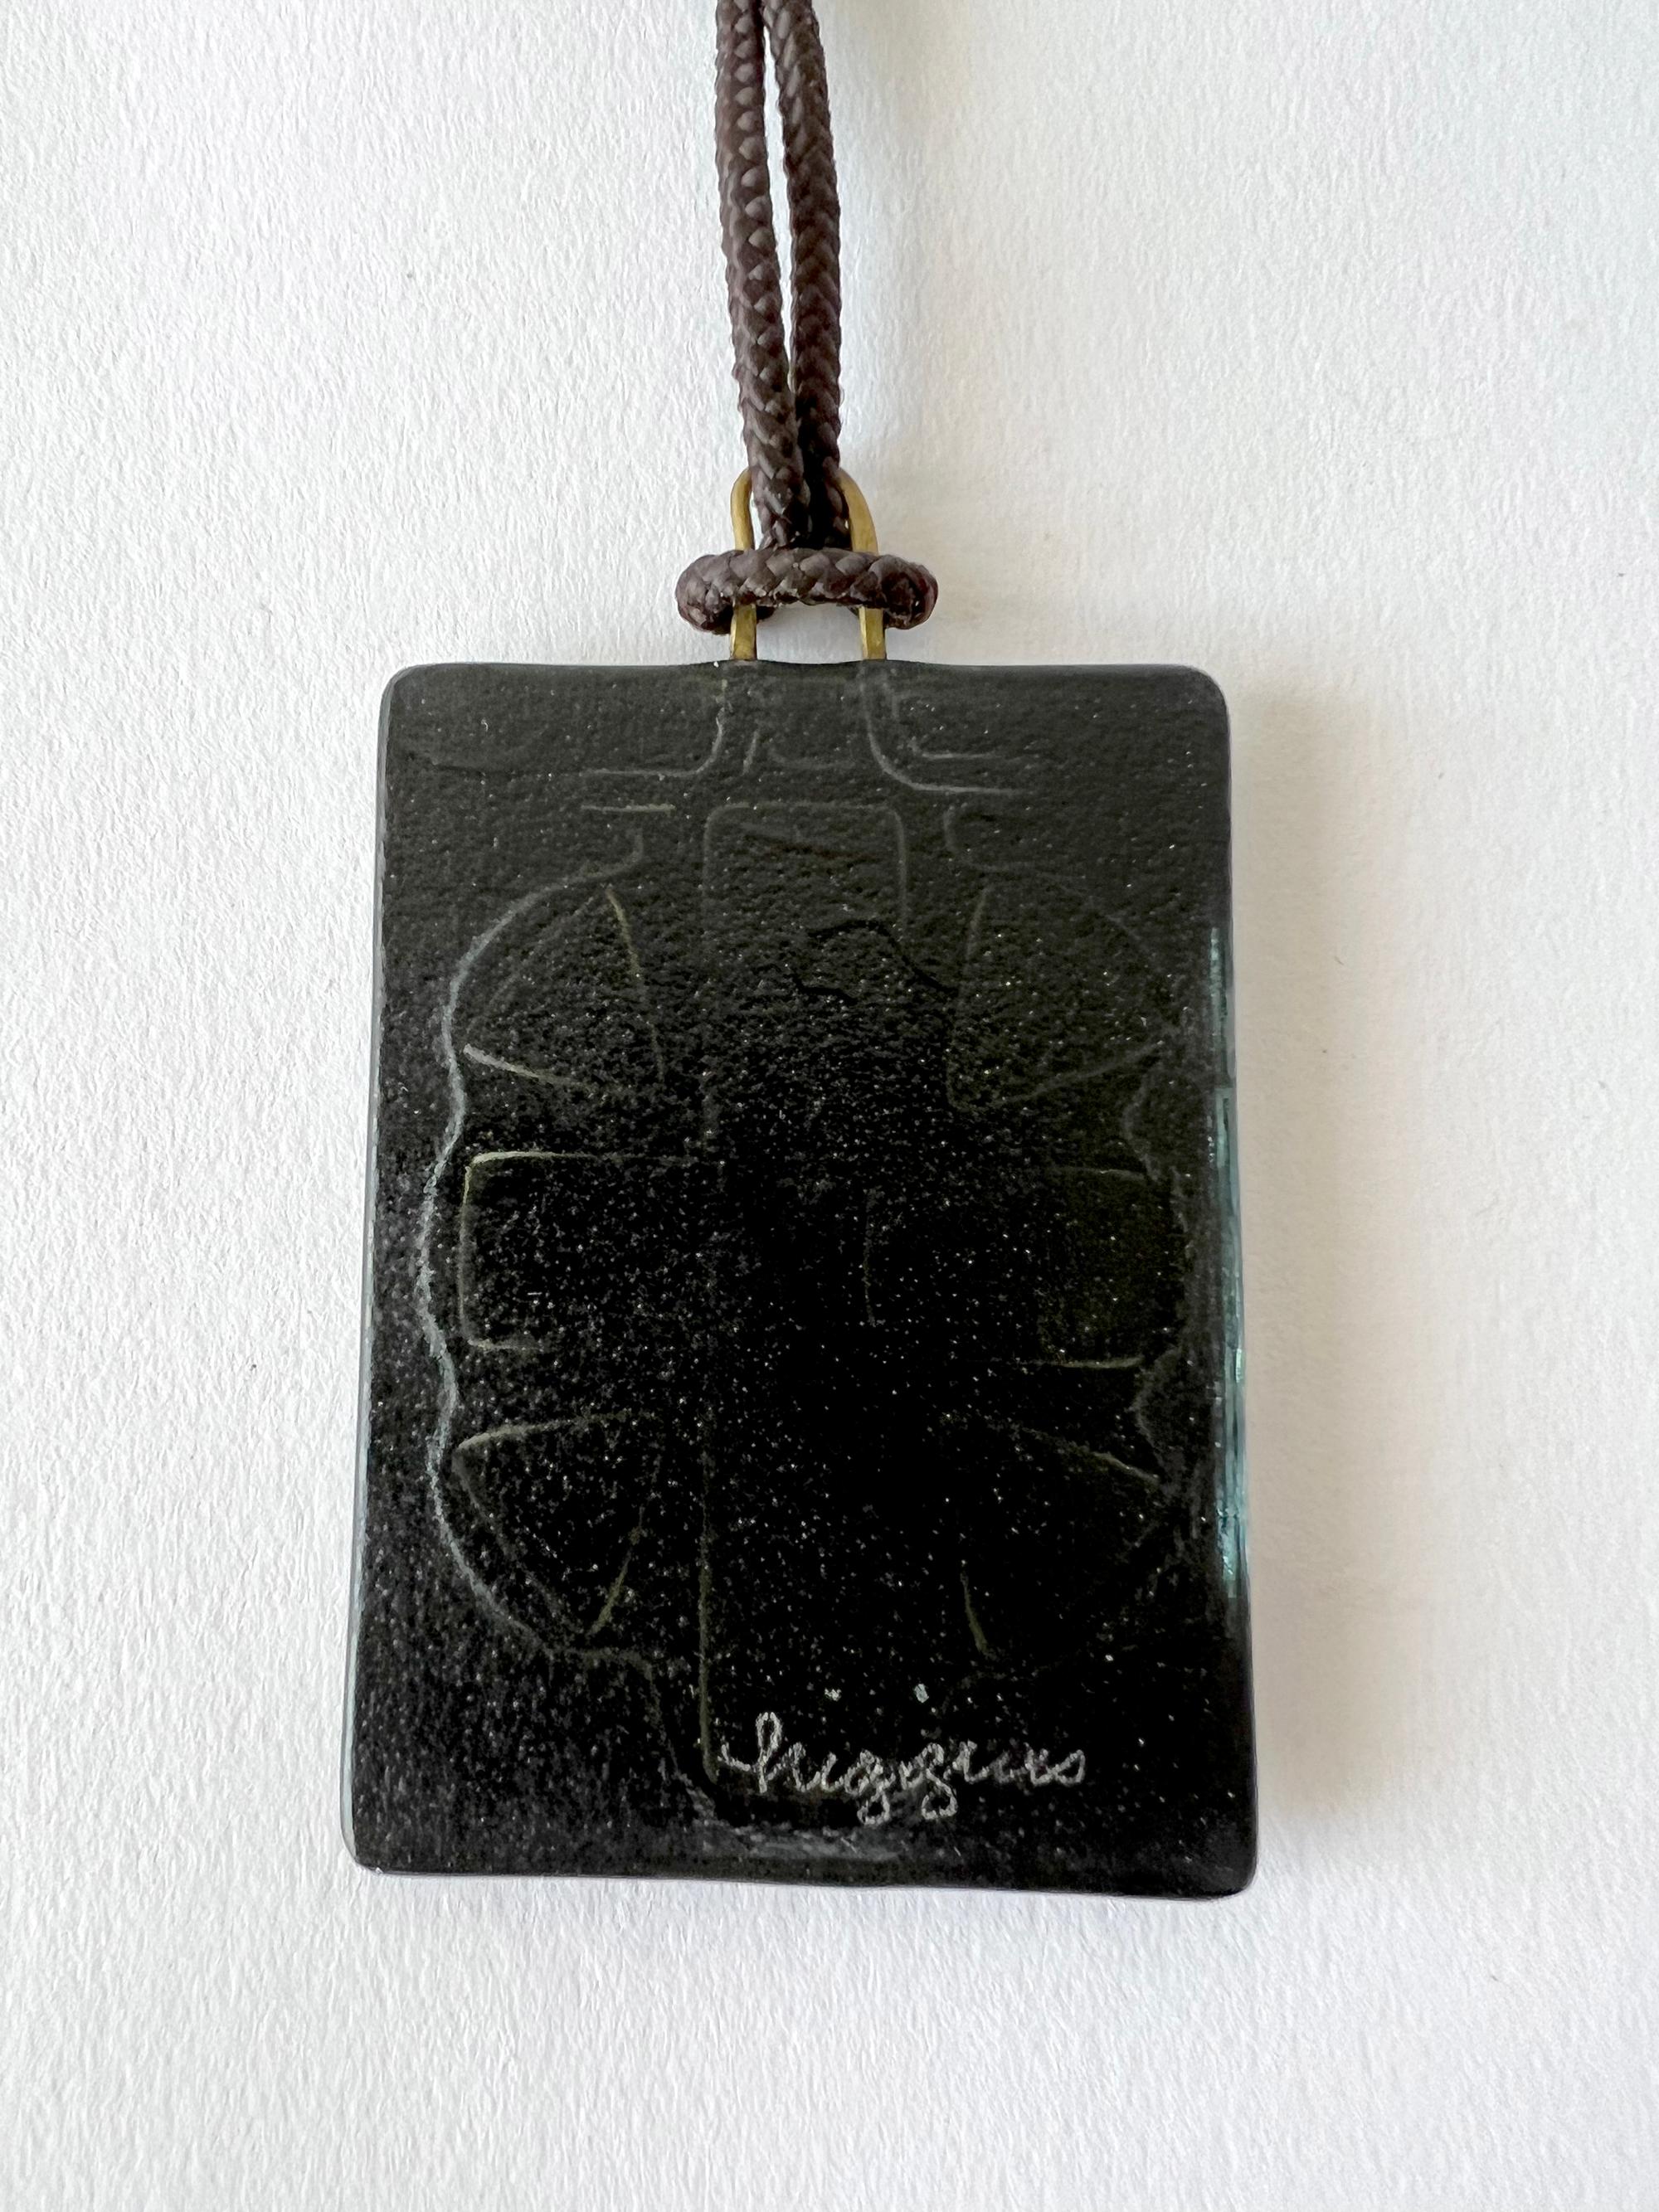 Vintage Frances Michael Higgins American Modernist Glass Pendant Necklace In Good Condition For Sale In Palm Springs, CA